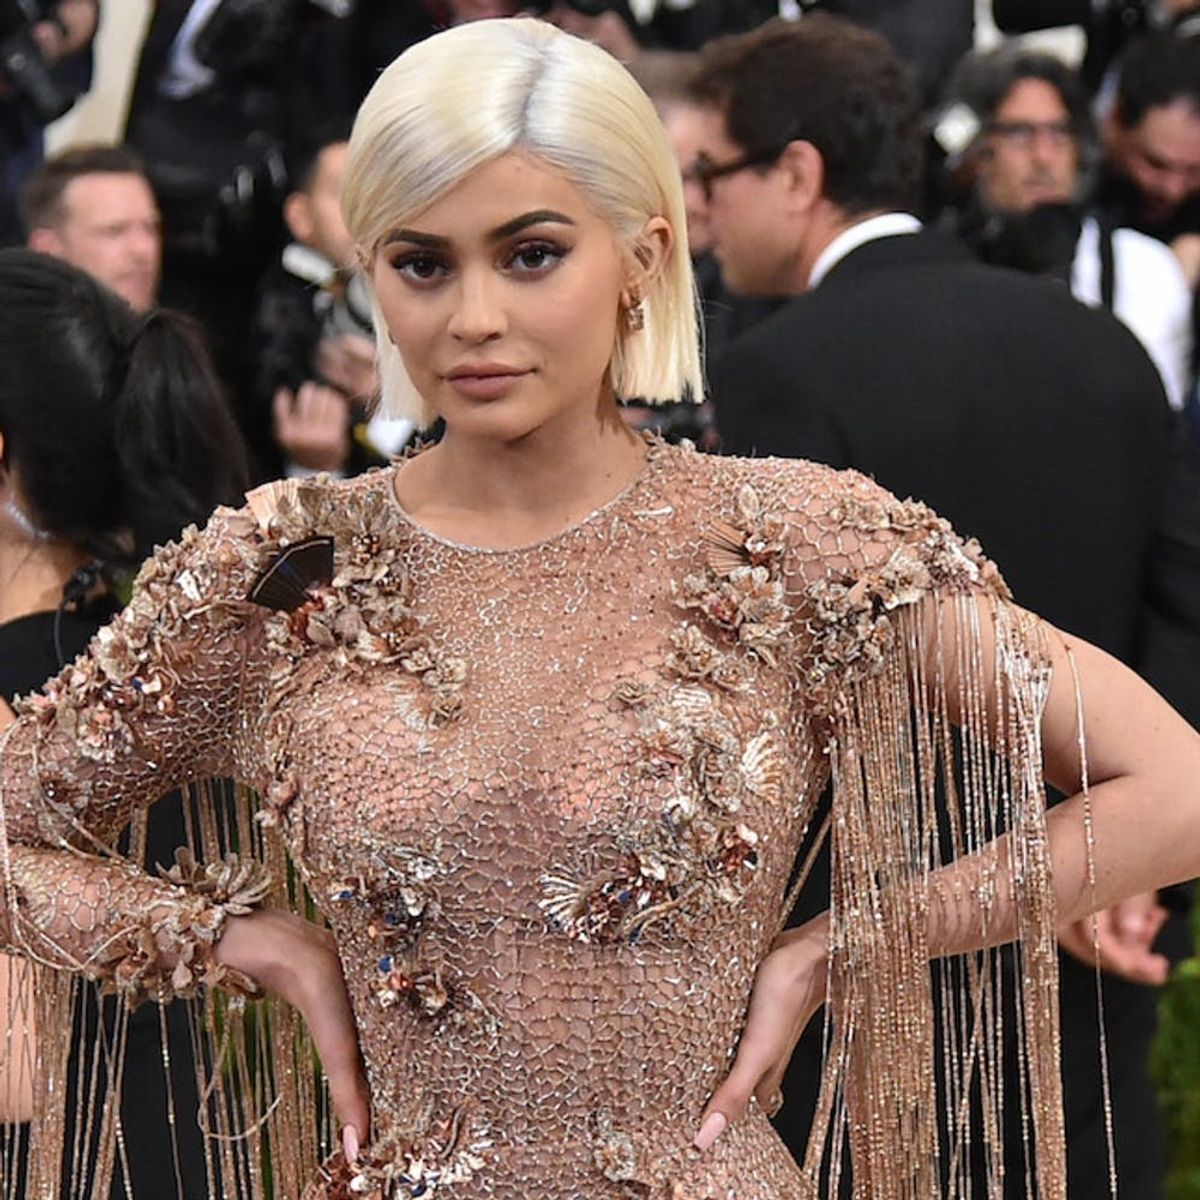 All the Times Kylie Jenner Has Been Accused of Plagiarizing Other Designers